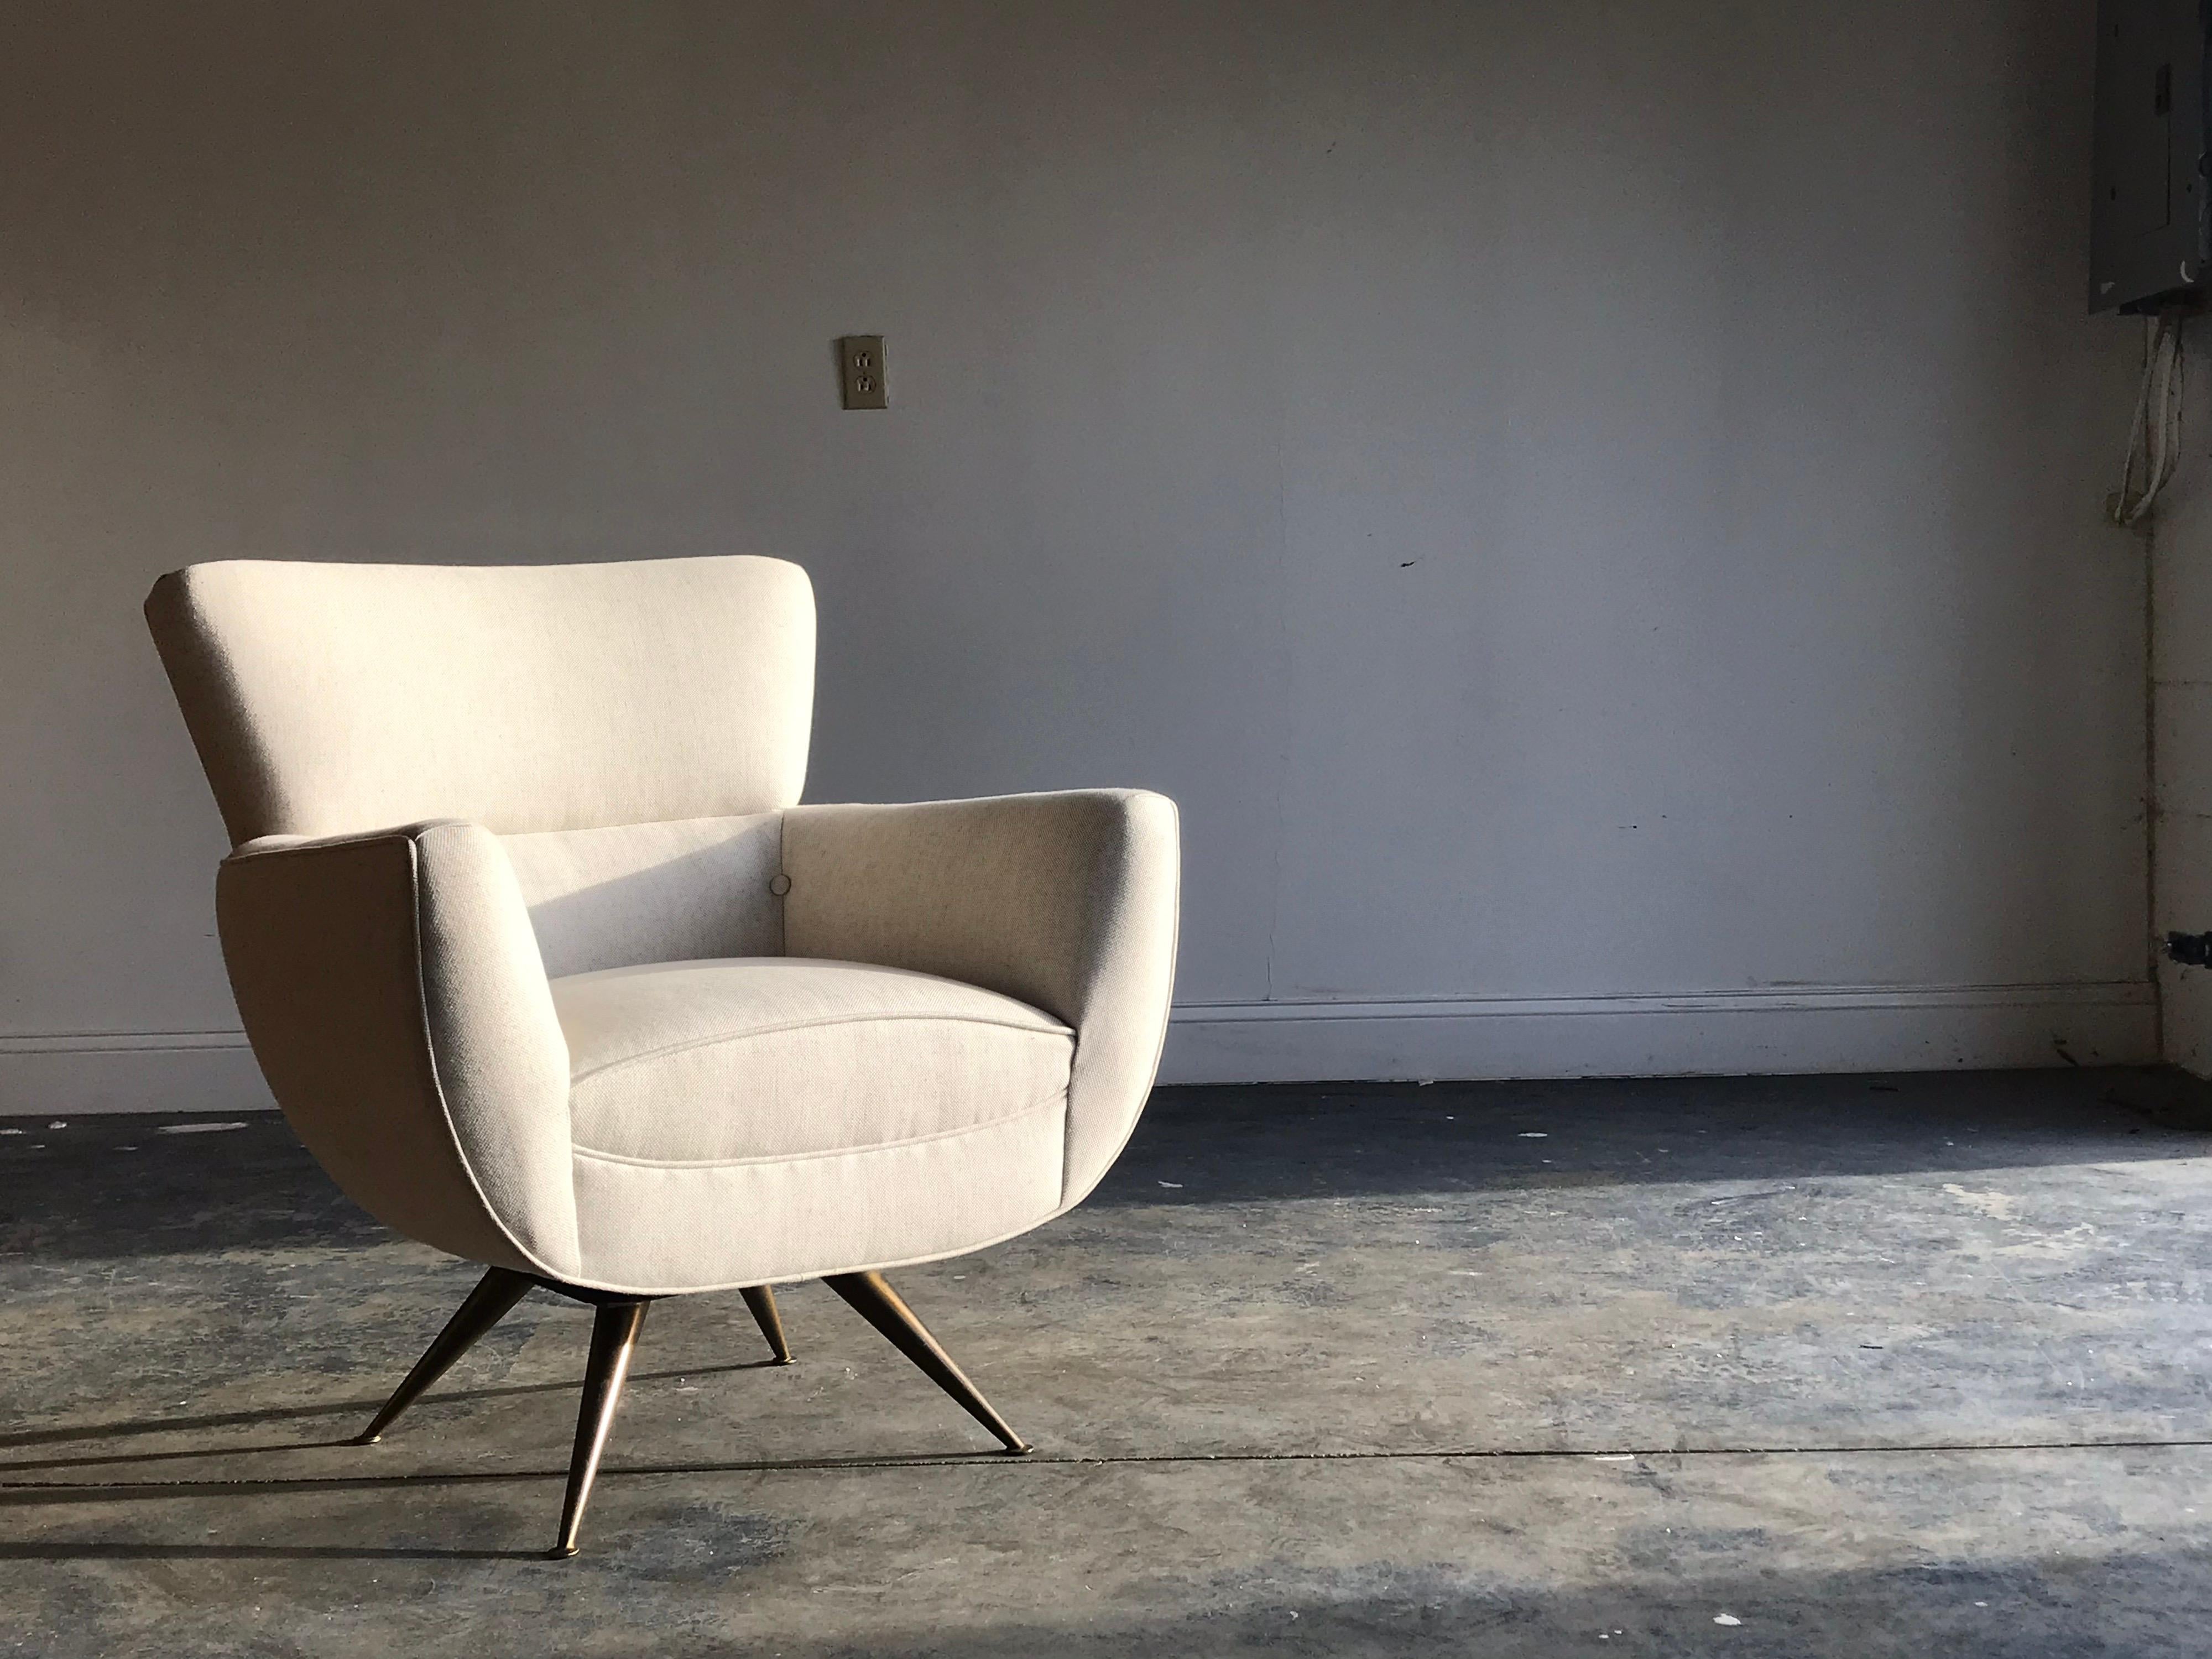 Rare swiveling lounge chair by Henry P. Glass. Reupholstered in a neutral speckled oatmeal fabric. Brass splayed legs in original condition with nice patina.